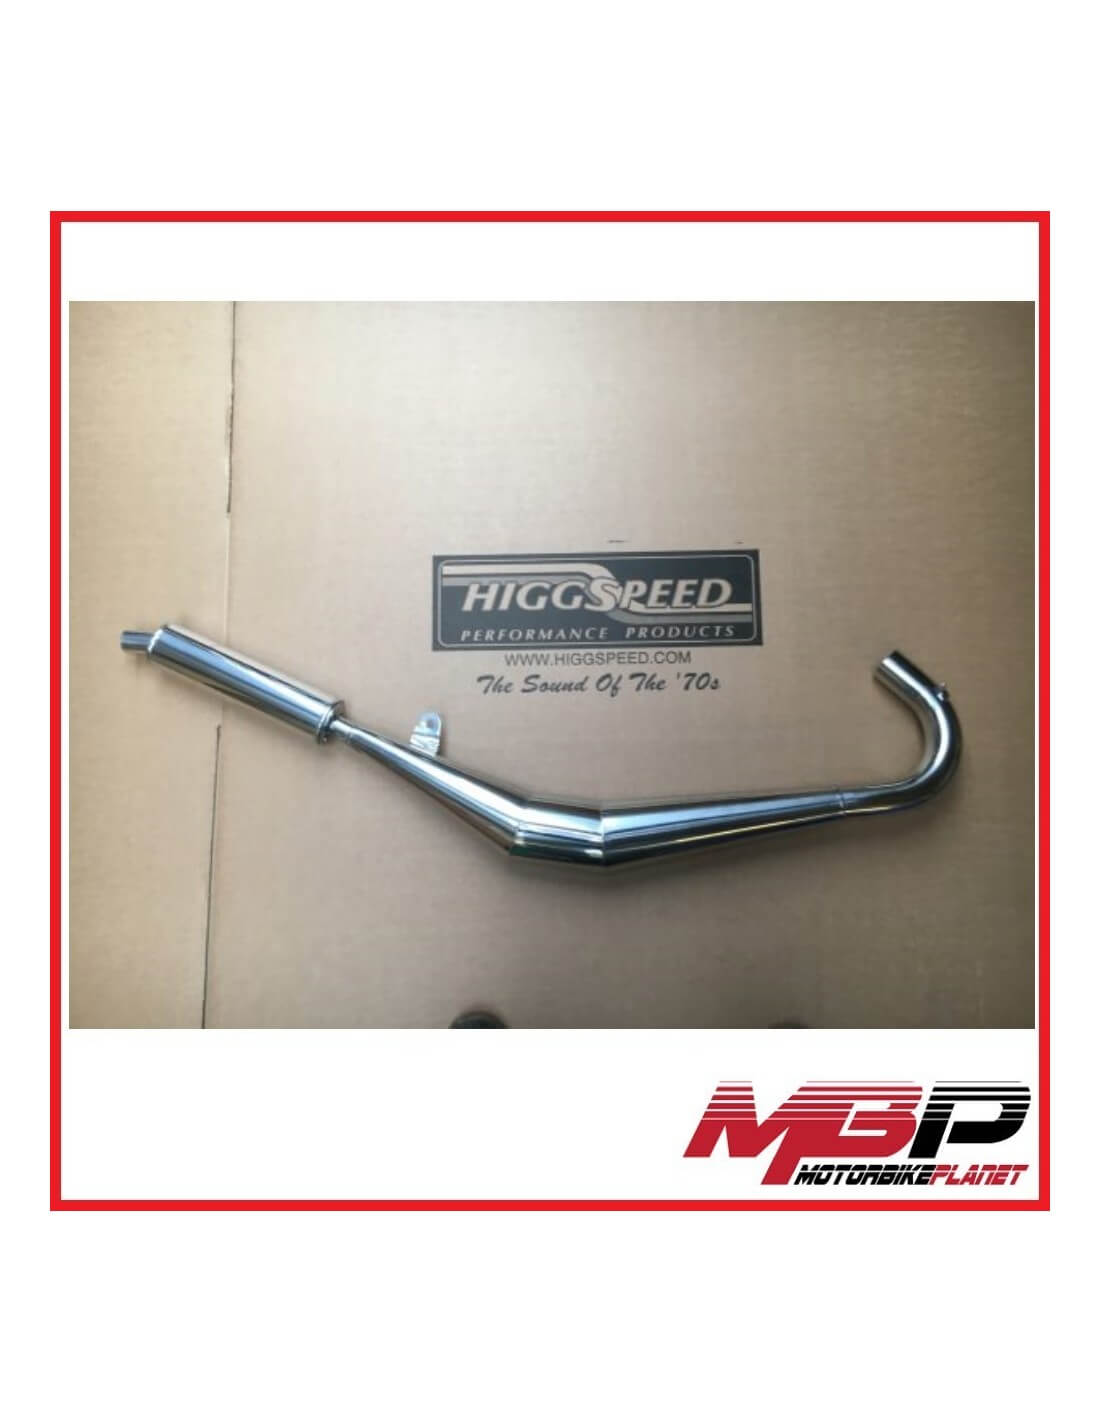 Exhaust Expansion Chamber Pipe Inox Polished Gp Style For Suzuki Gt 125 1974 1978 Mbp559 Motorbike Planet